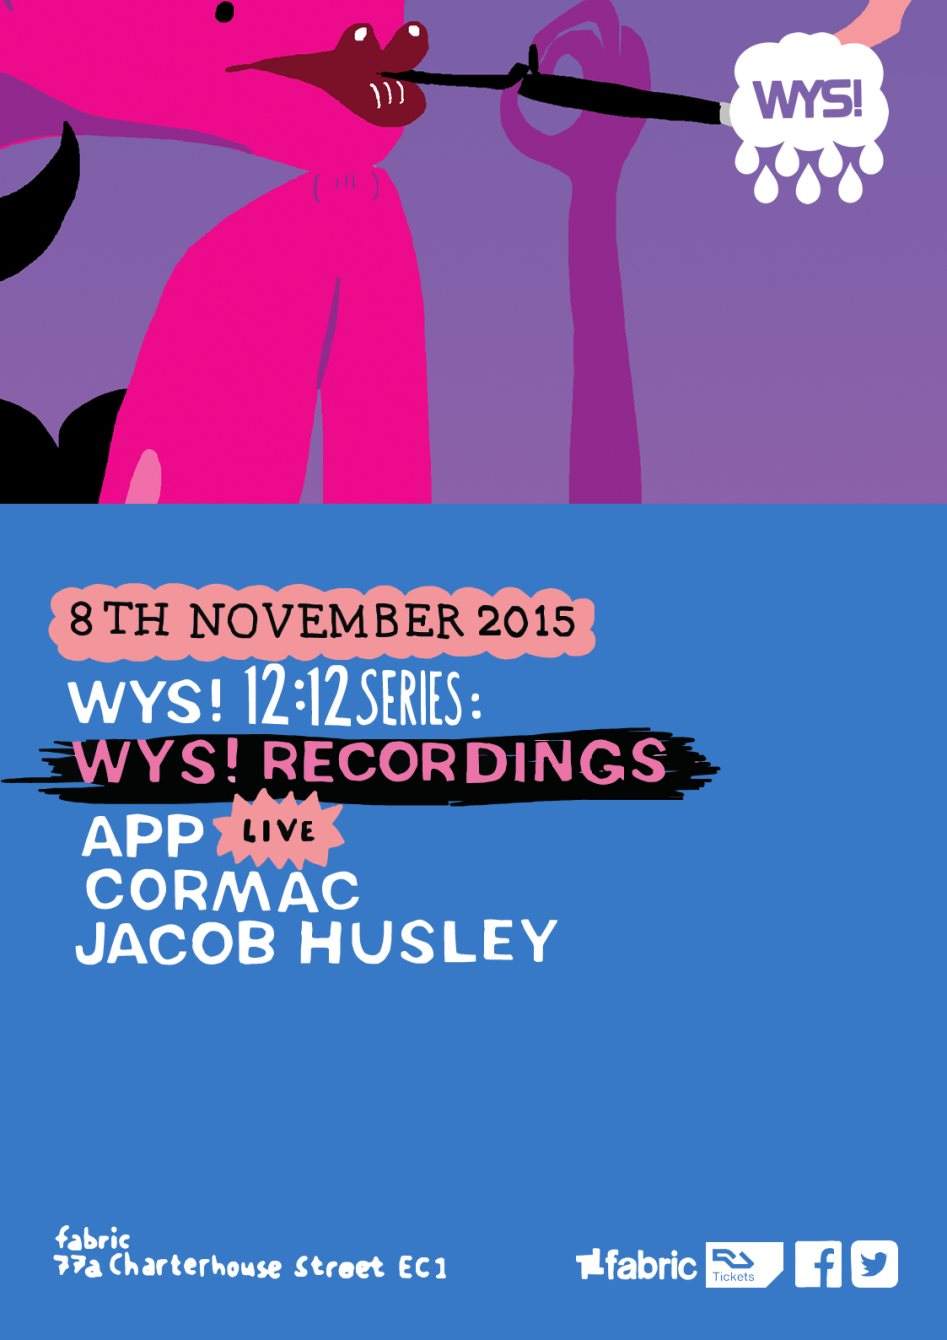 WYS! 12:12 Series presents: WYS! Recordings - フライヤー表